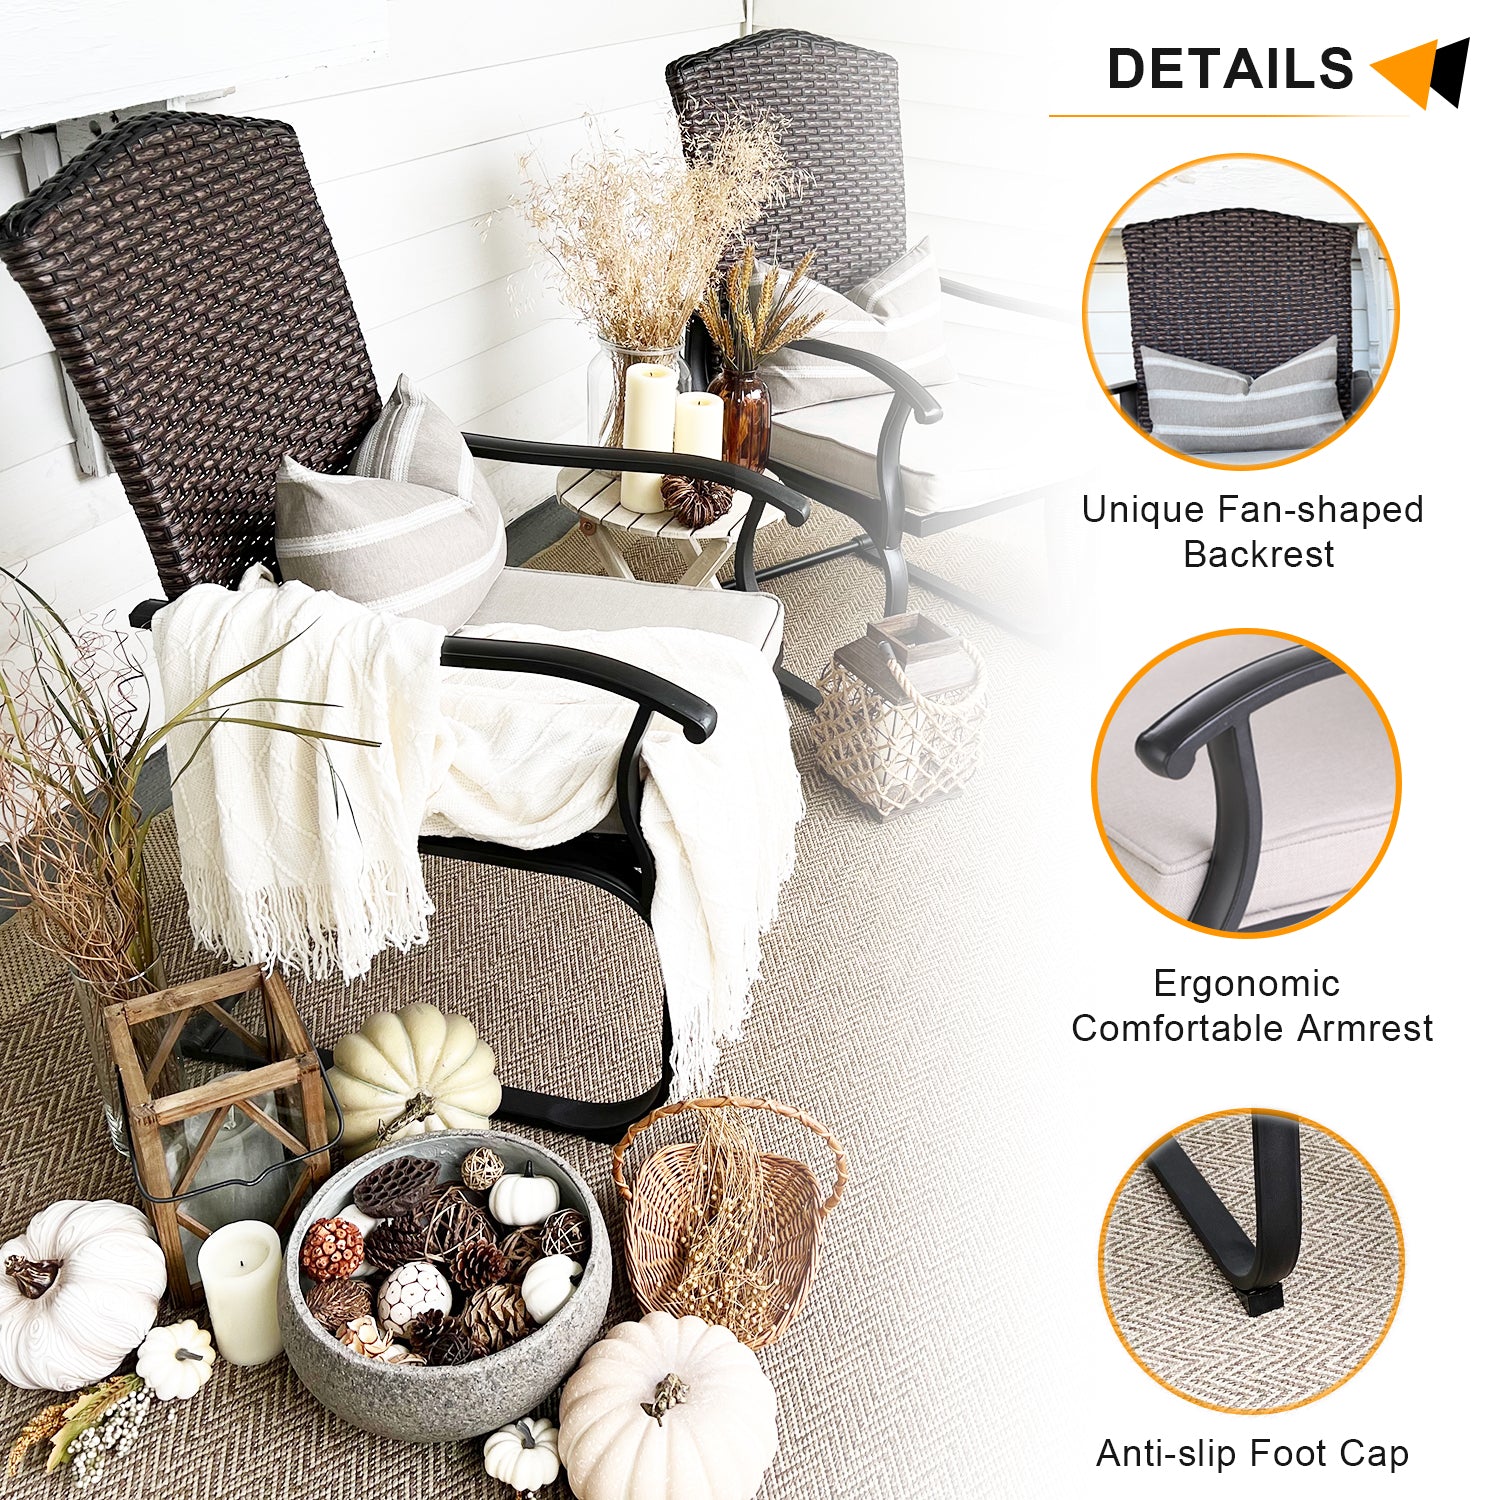 Sophia & William 7-Piece Steel Rectangle Table & Rattan C-spring Cushioned Chairs Outdoor Dining Set